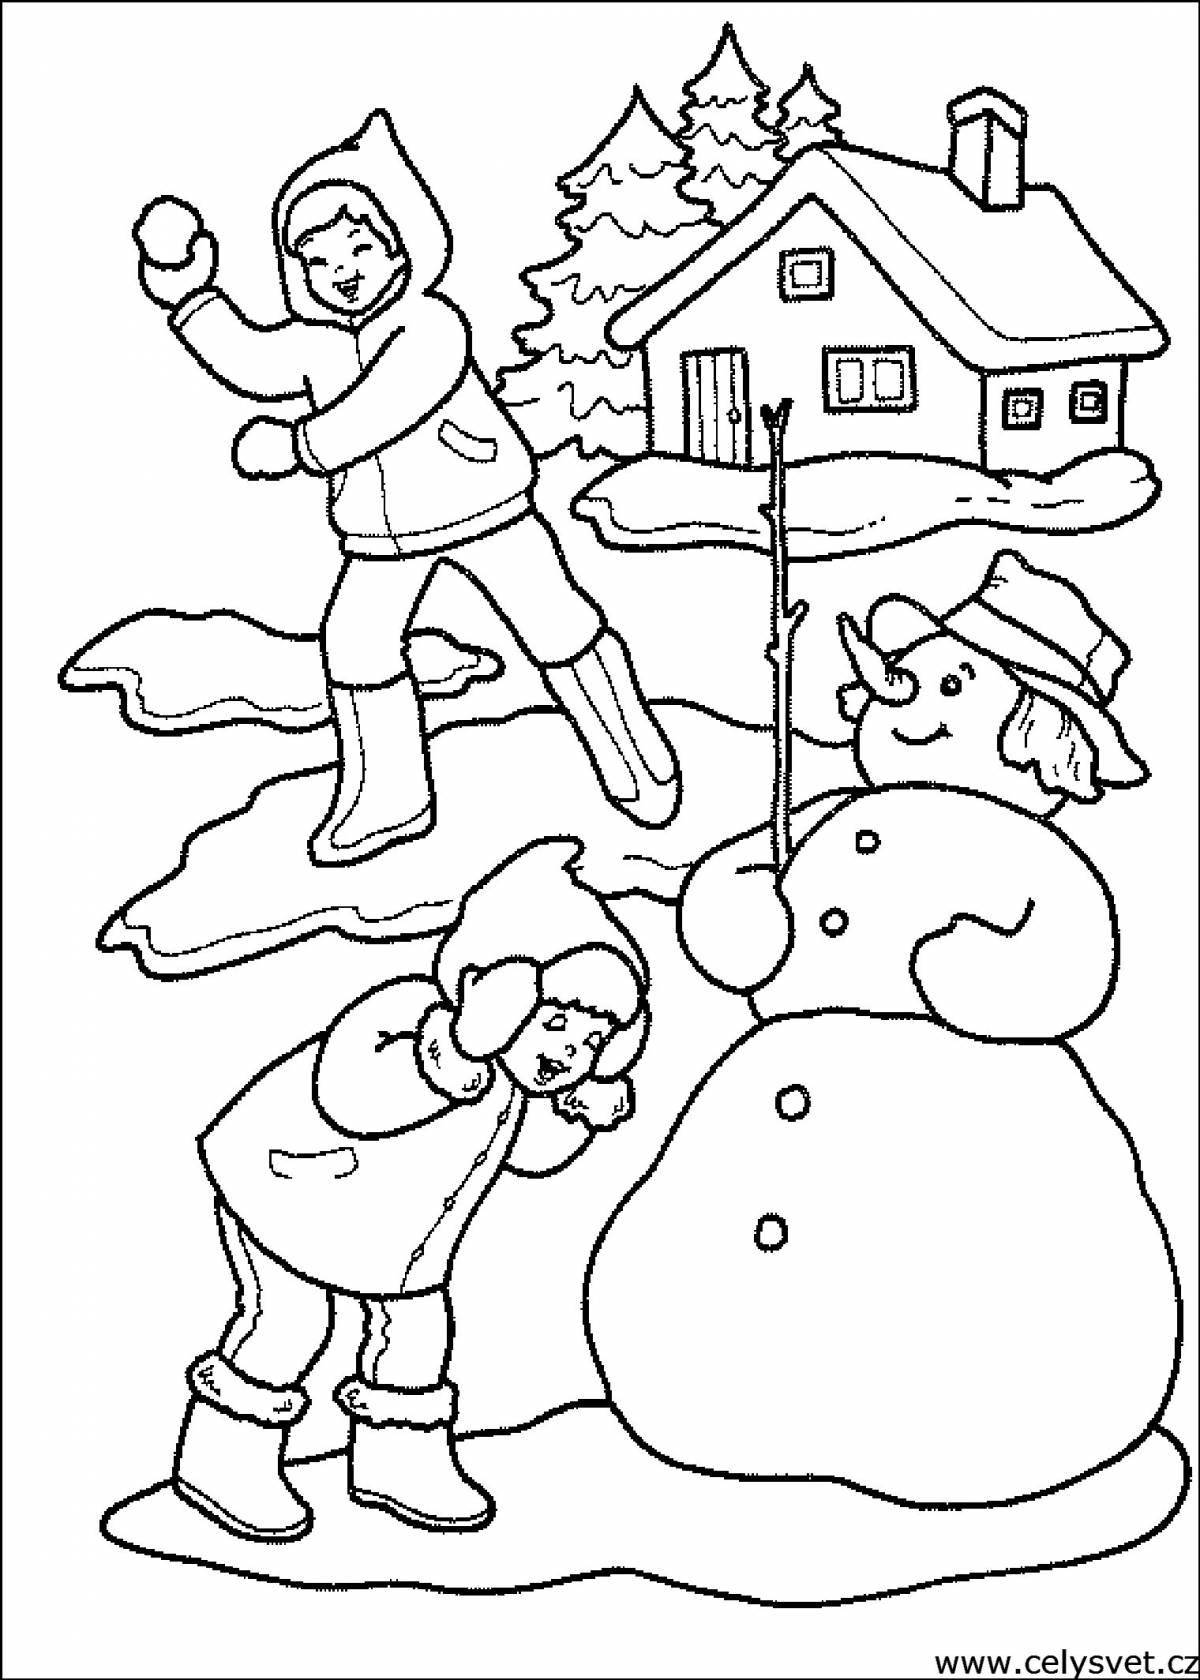 Creative December coloring book for kids